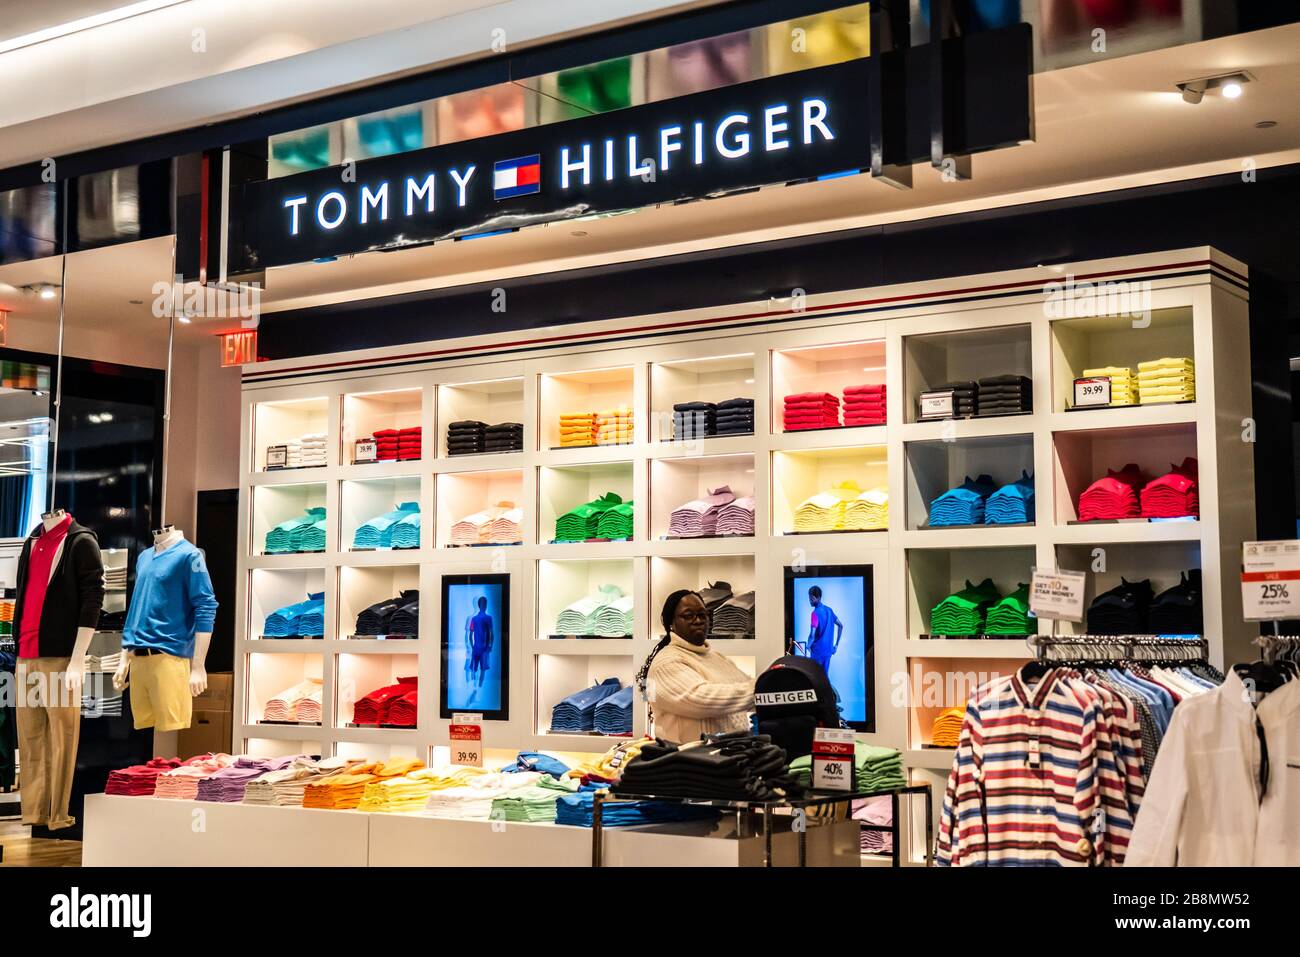 tommy hilfiger in macy's